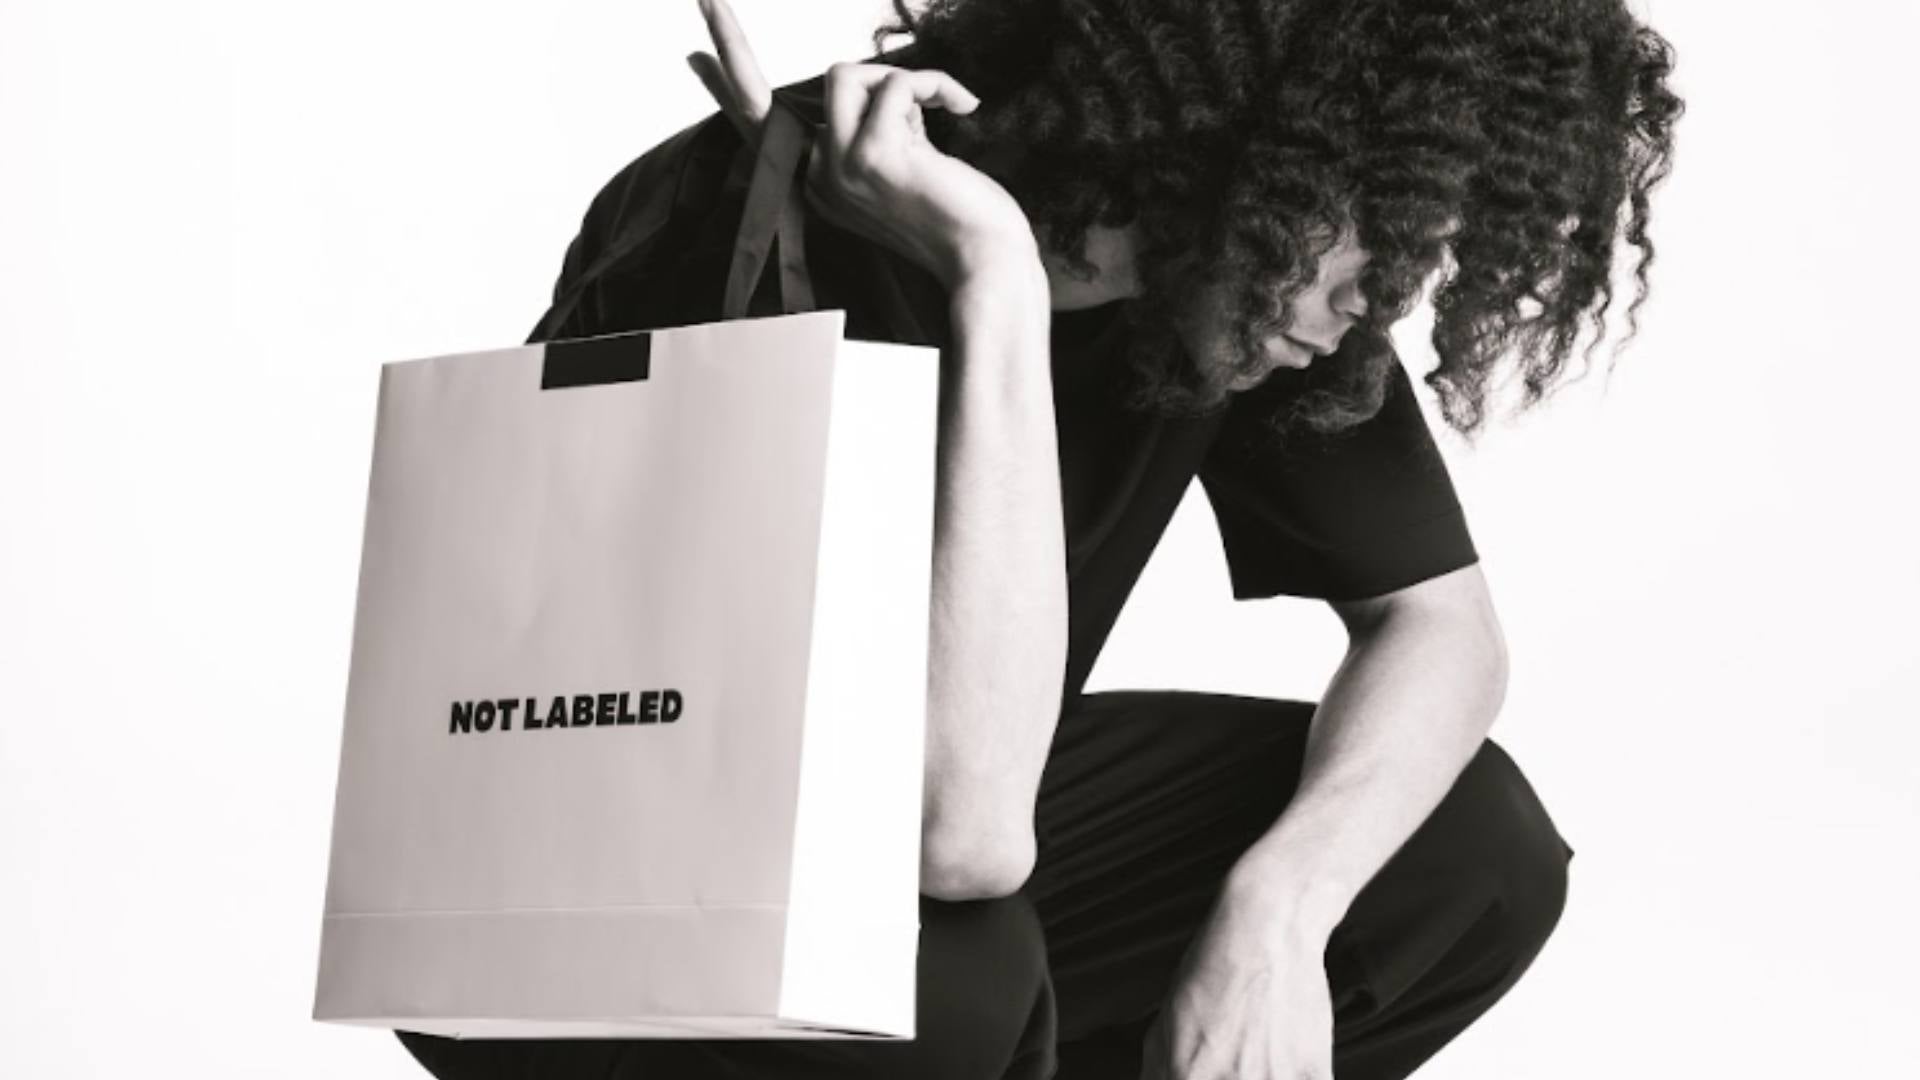 A black and white photo shows a man kneeling while looking off to the side while holding a white Not Labeled shopping bag, demonstrating ethical fashion options.